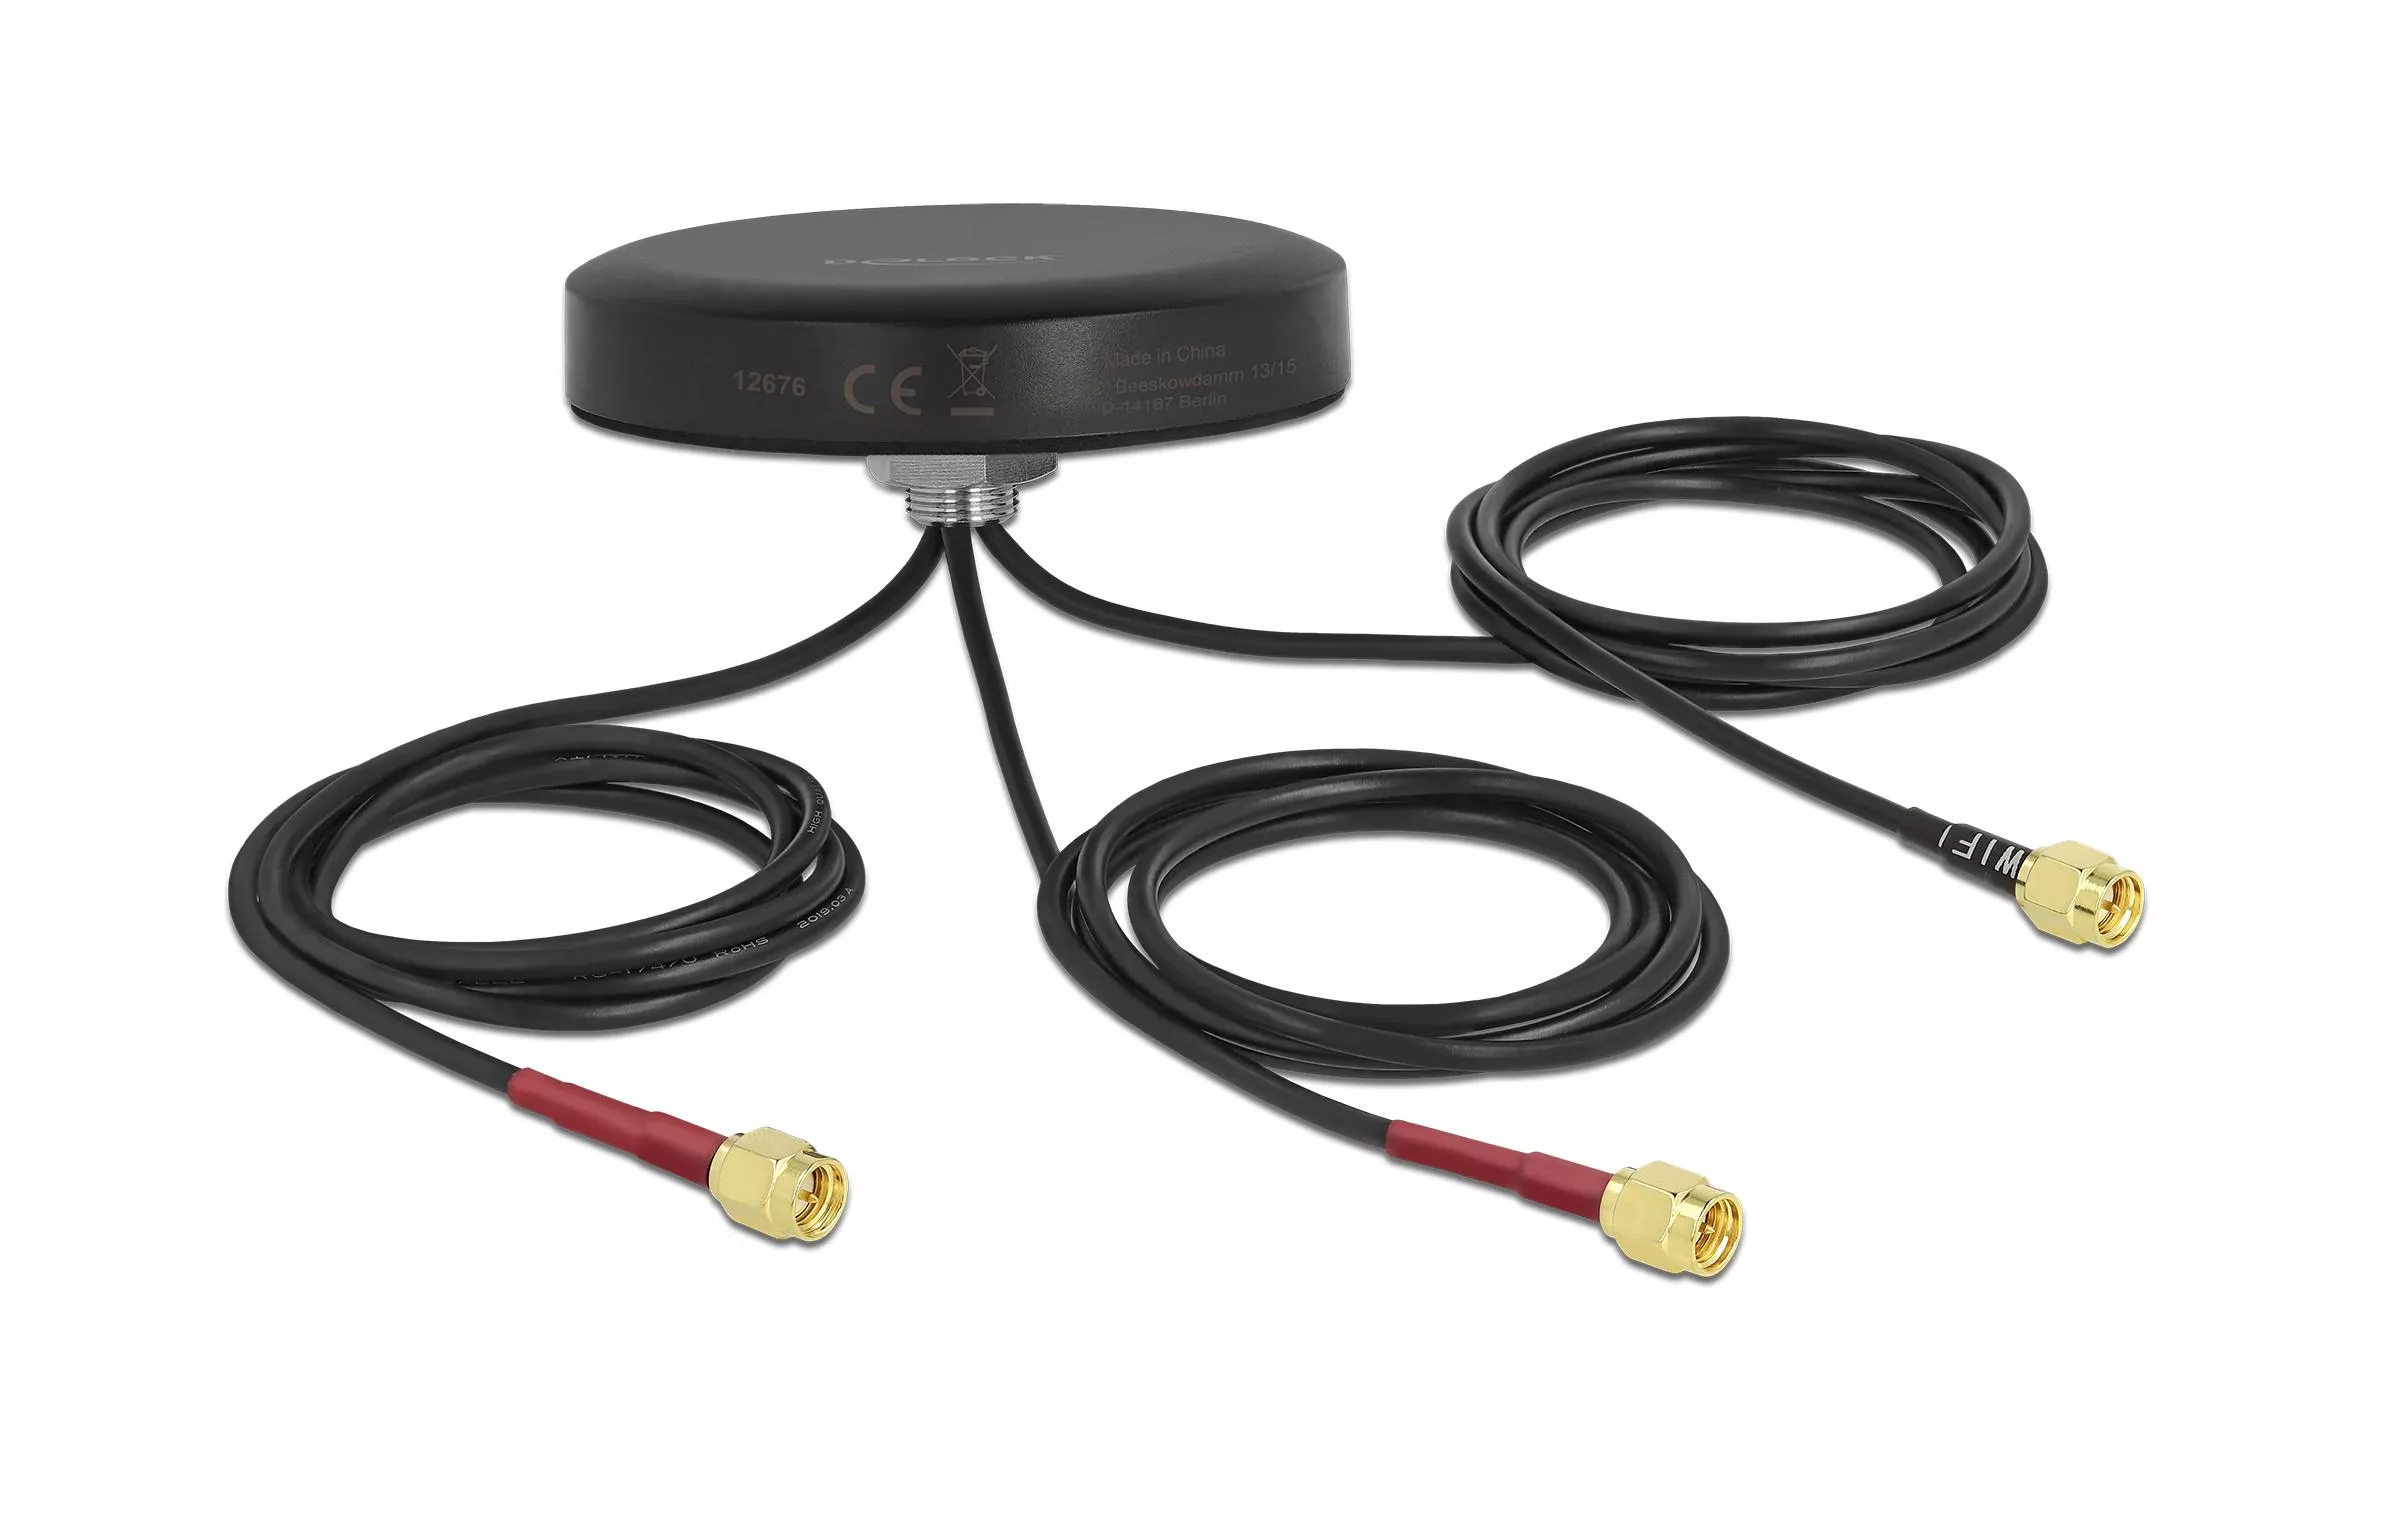 LTE/WLAN/GPS-Antenne LTE MIMO Dualband SMA 2 dBi Rundstrahl